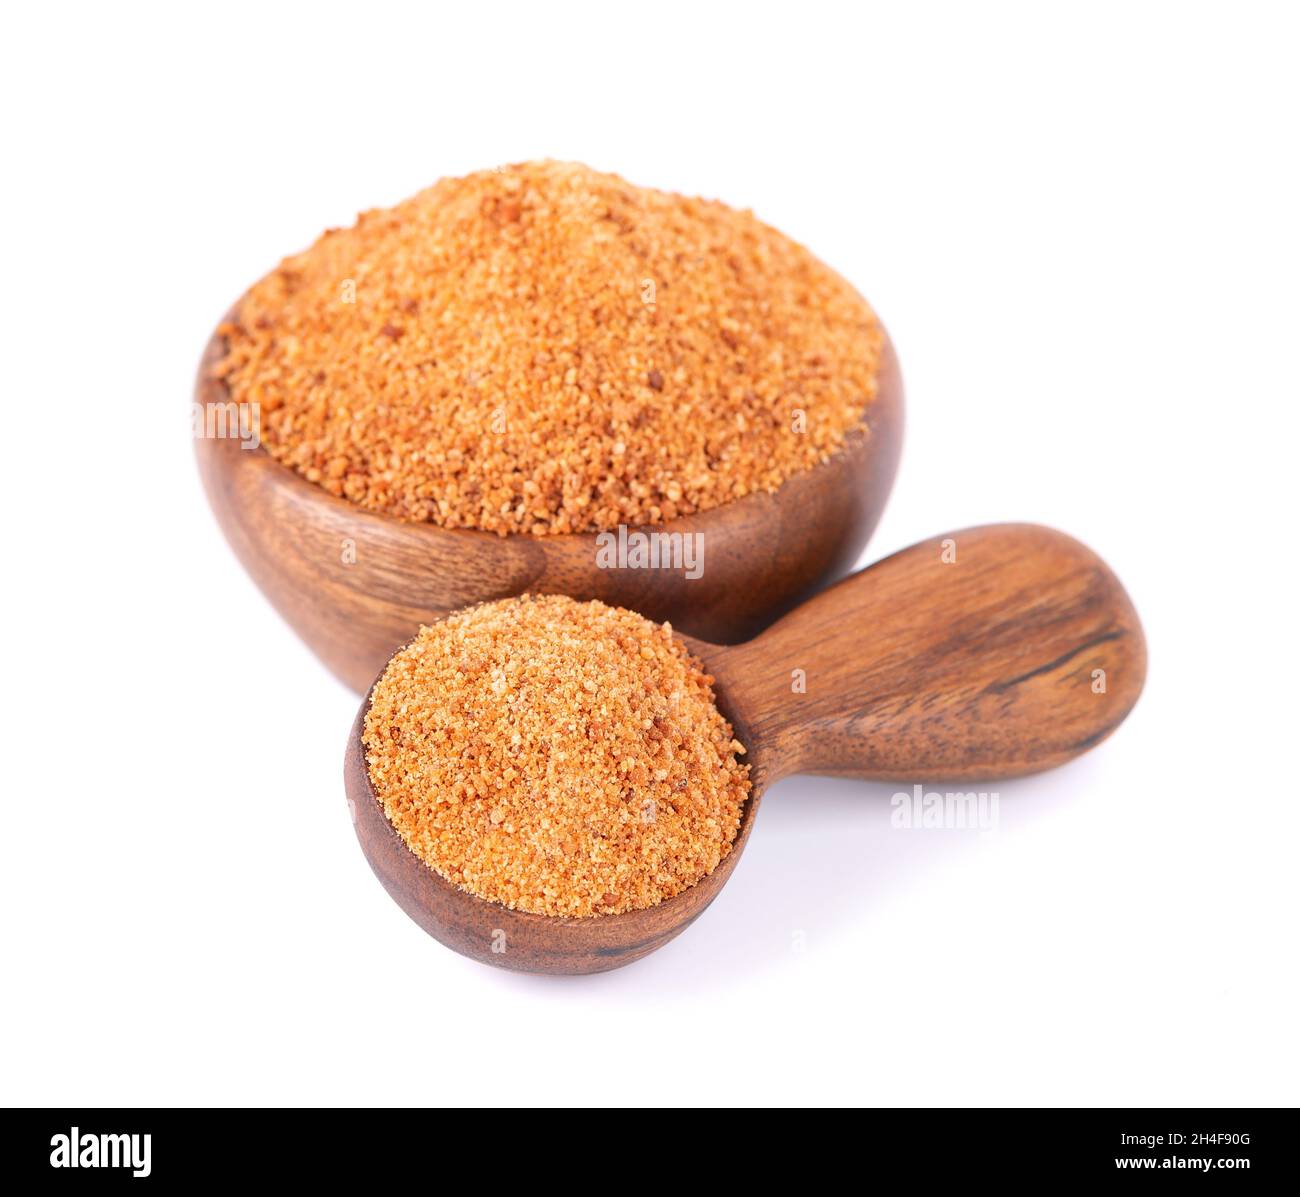 Coconut sugar isolated on white background. Brown unrefined coconut palm sugar in wooden bowl and spoon. Stock Photo